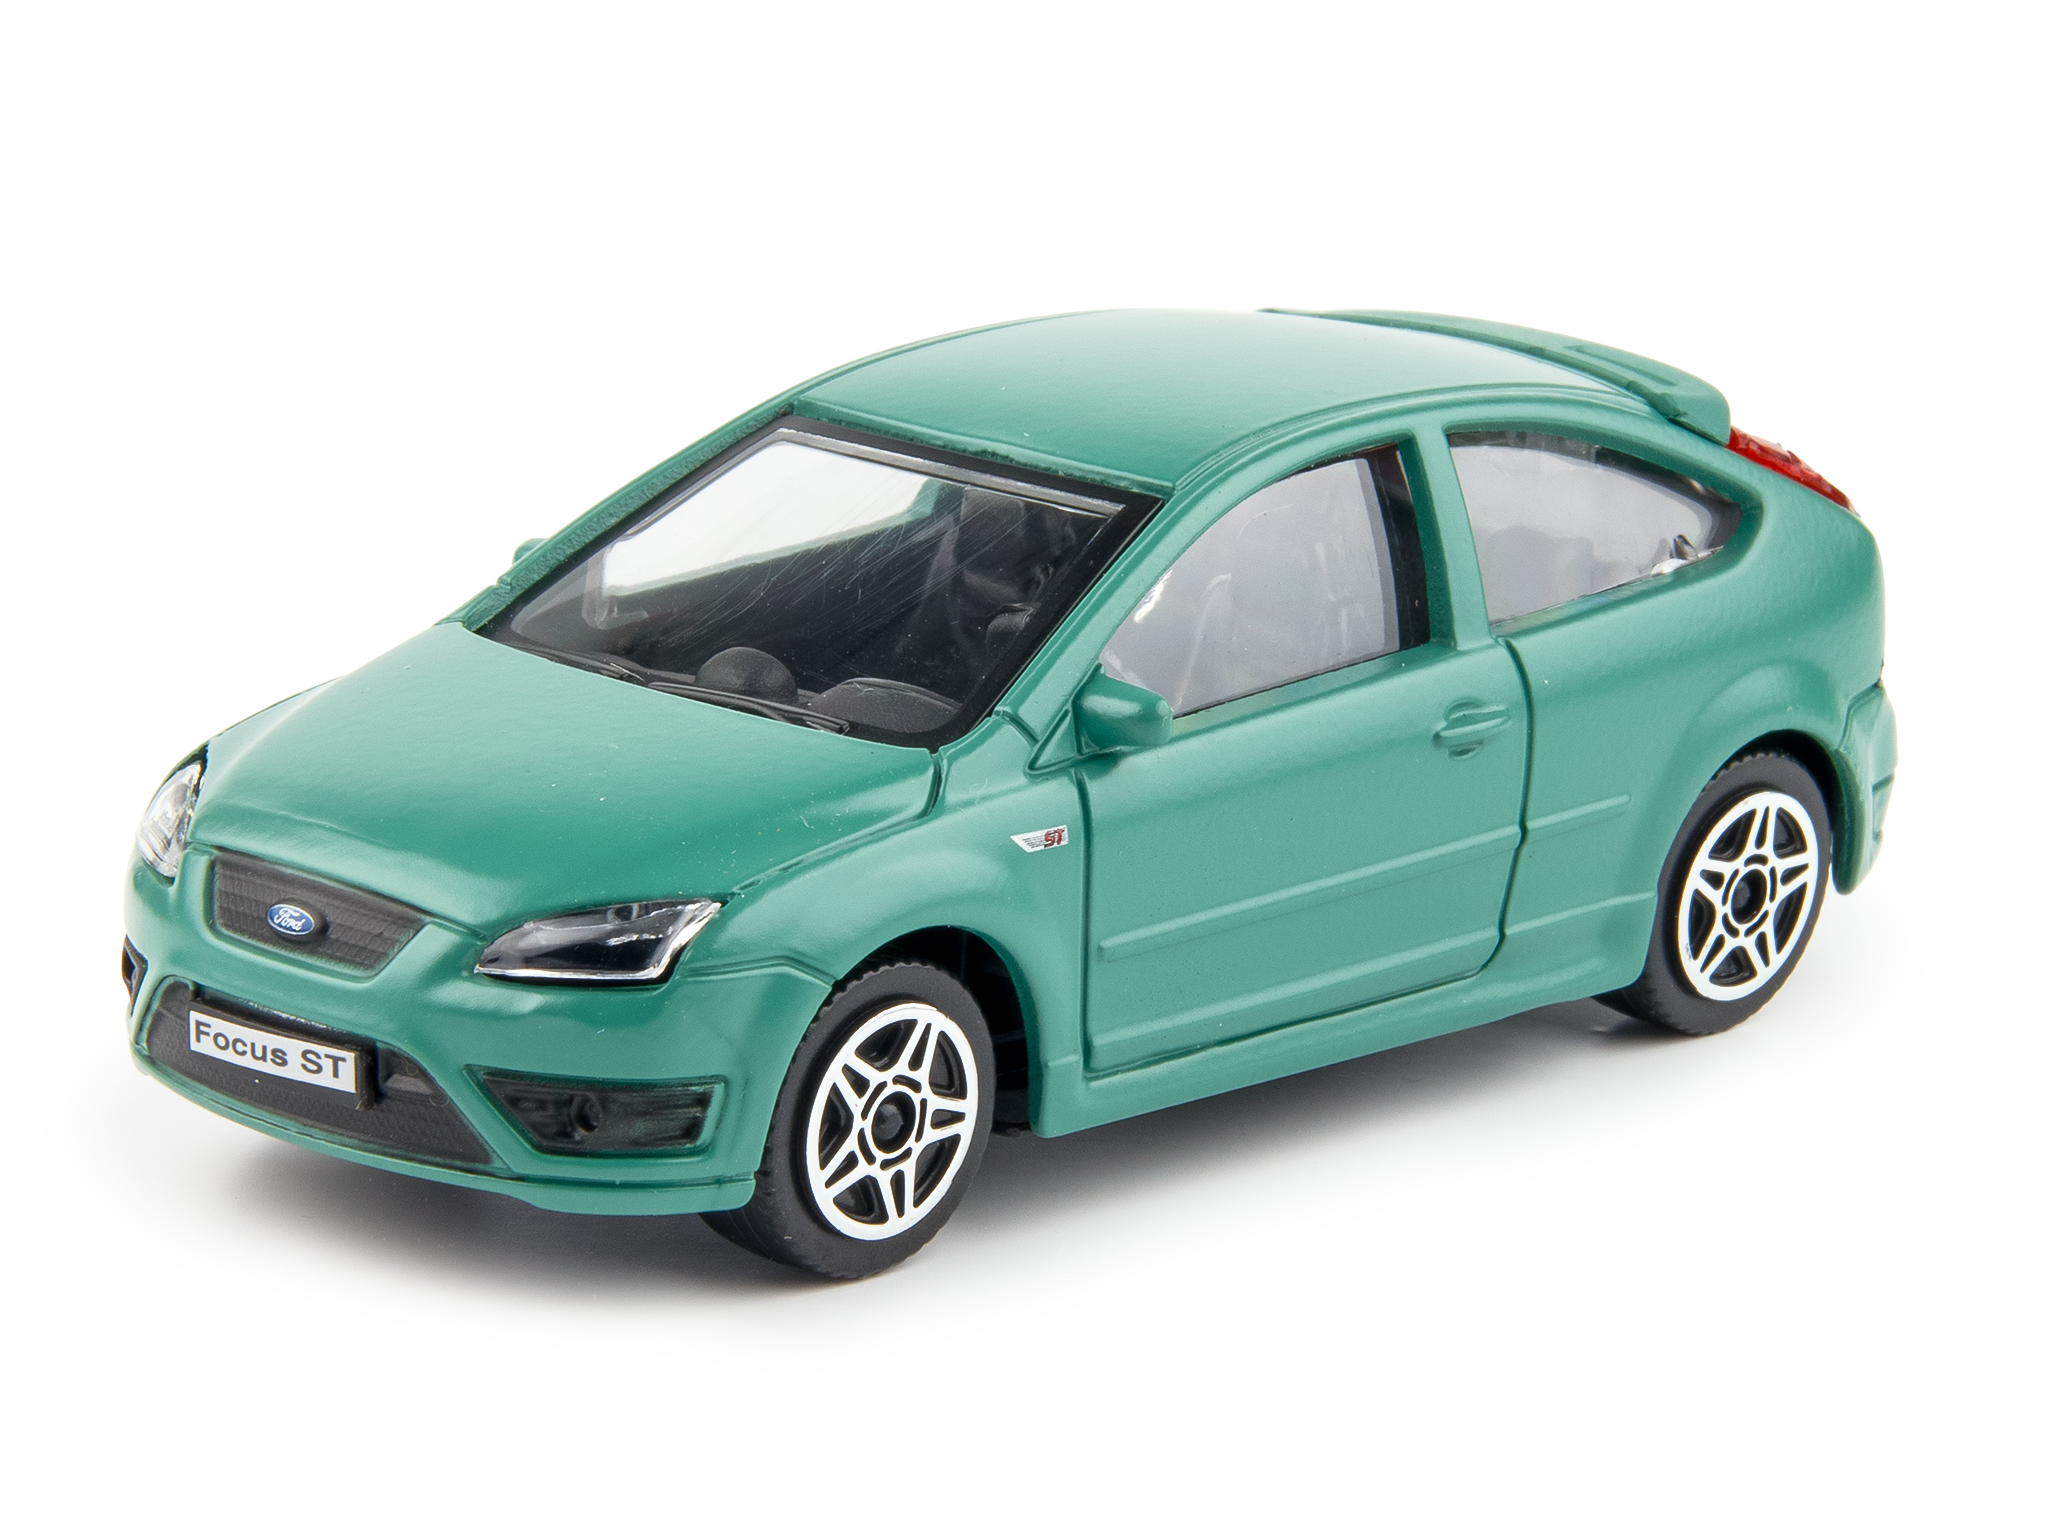 Ford Focus ST Olive Green Silk - 1:43 Scale Diecast Toy Car